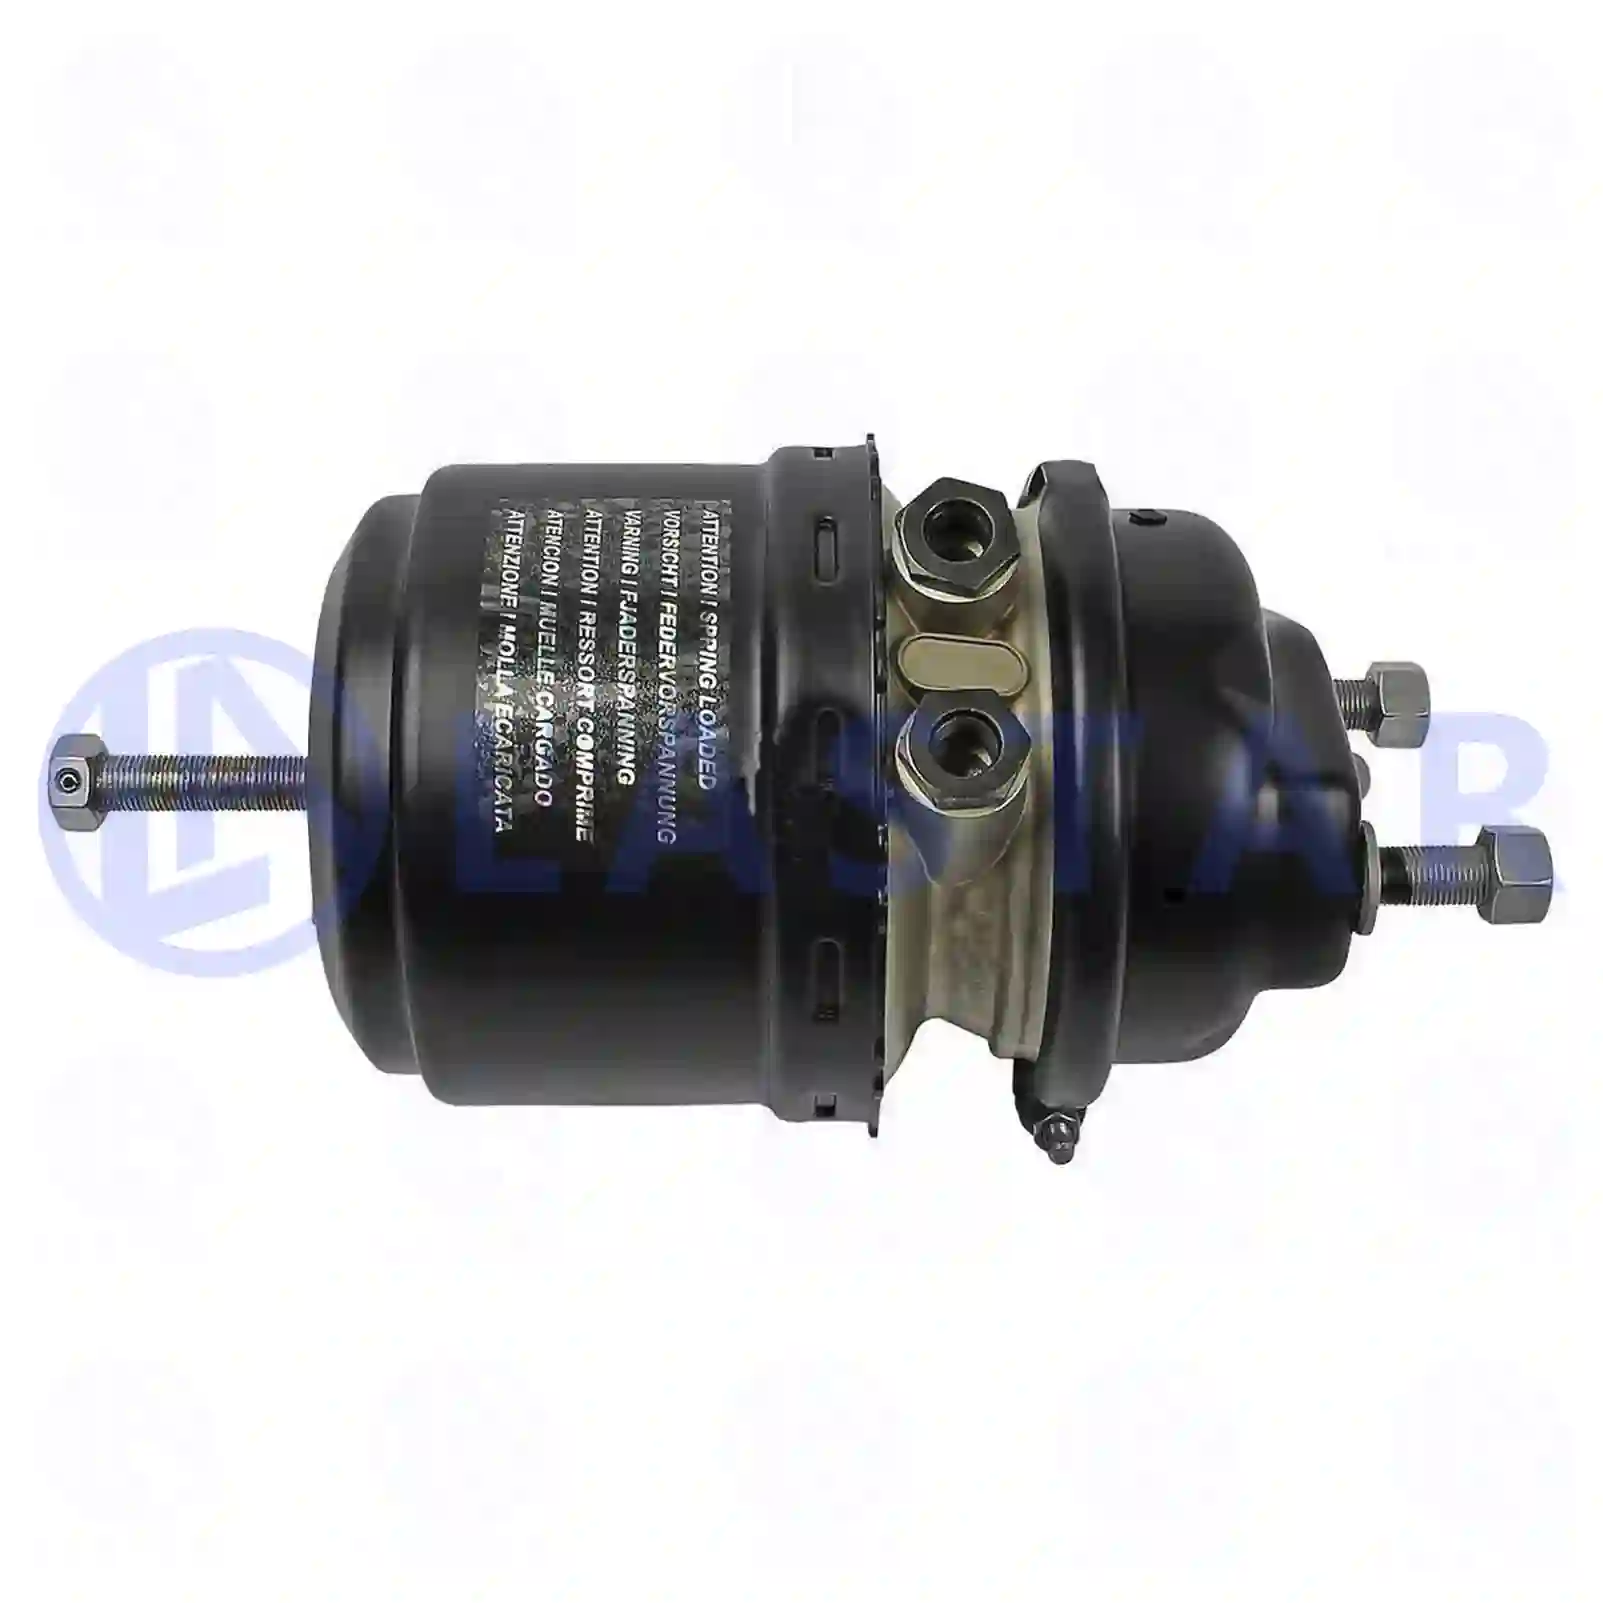 Spring brake cylinder, right, 77715238, 0203276700, 1519192, JAE0210405618, 0184205618, 1935450 ||  77715238 Lastar Spare Part | Truck Spare Parts, Auotomotive Spare Parts Spring brake cylinder, right, 77715238, 0203276700, 1519192, JAE0210405618, 0184205618, 1935450 ||  77715238 Lastar Spare Part | Truck Spare Parts, Auotomotive Spare Parts